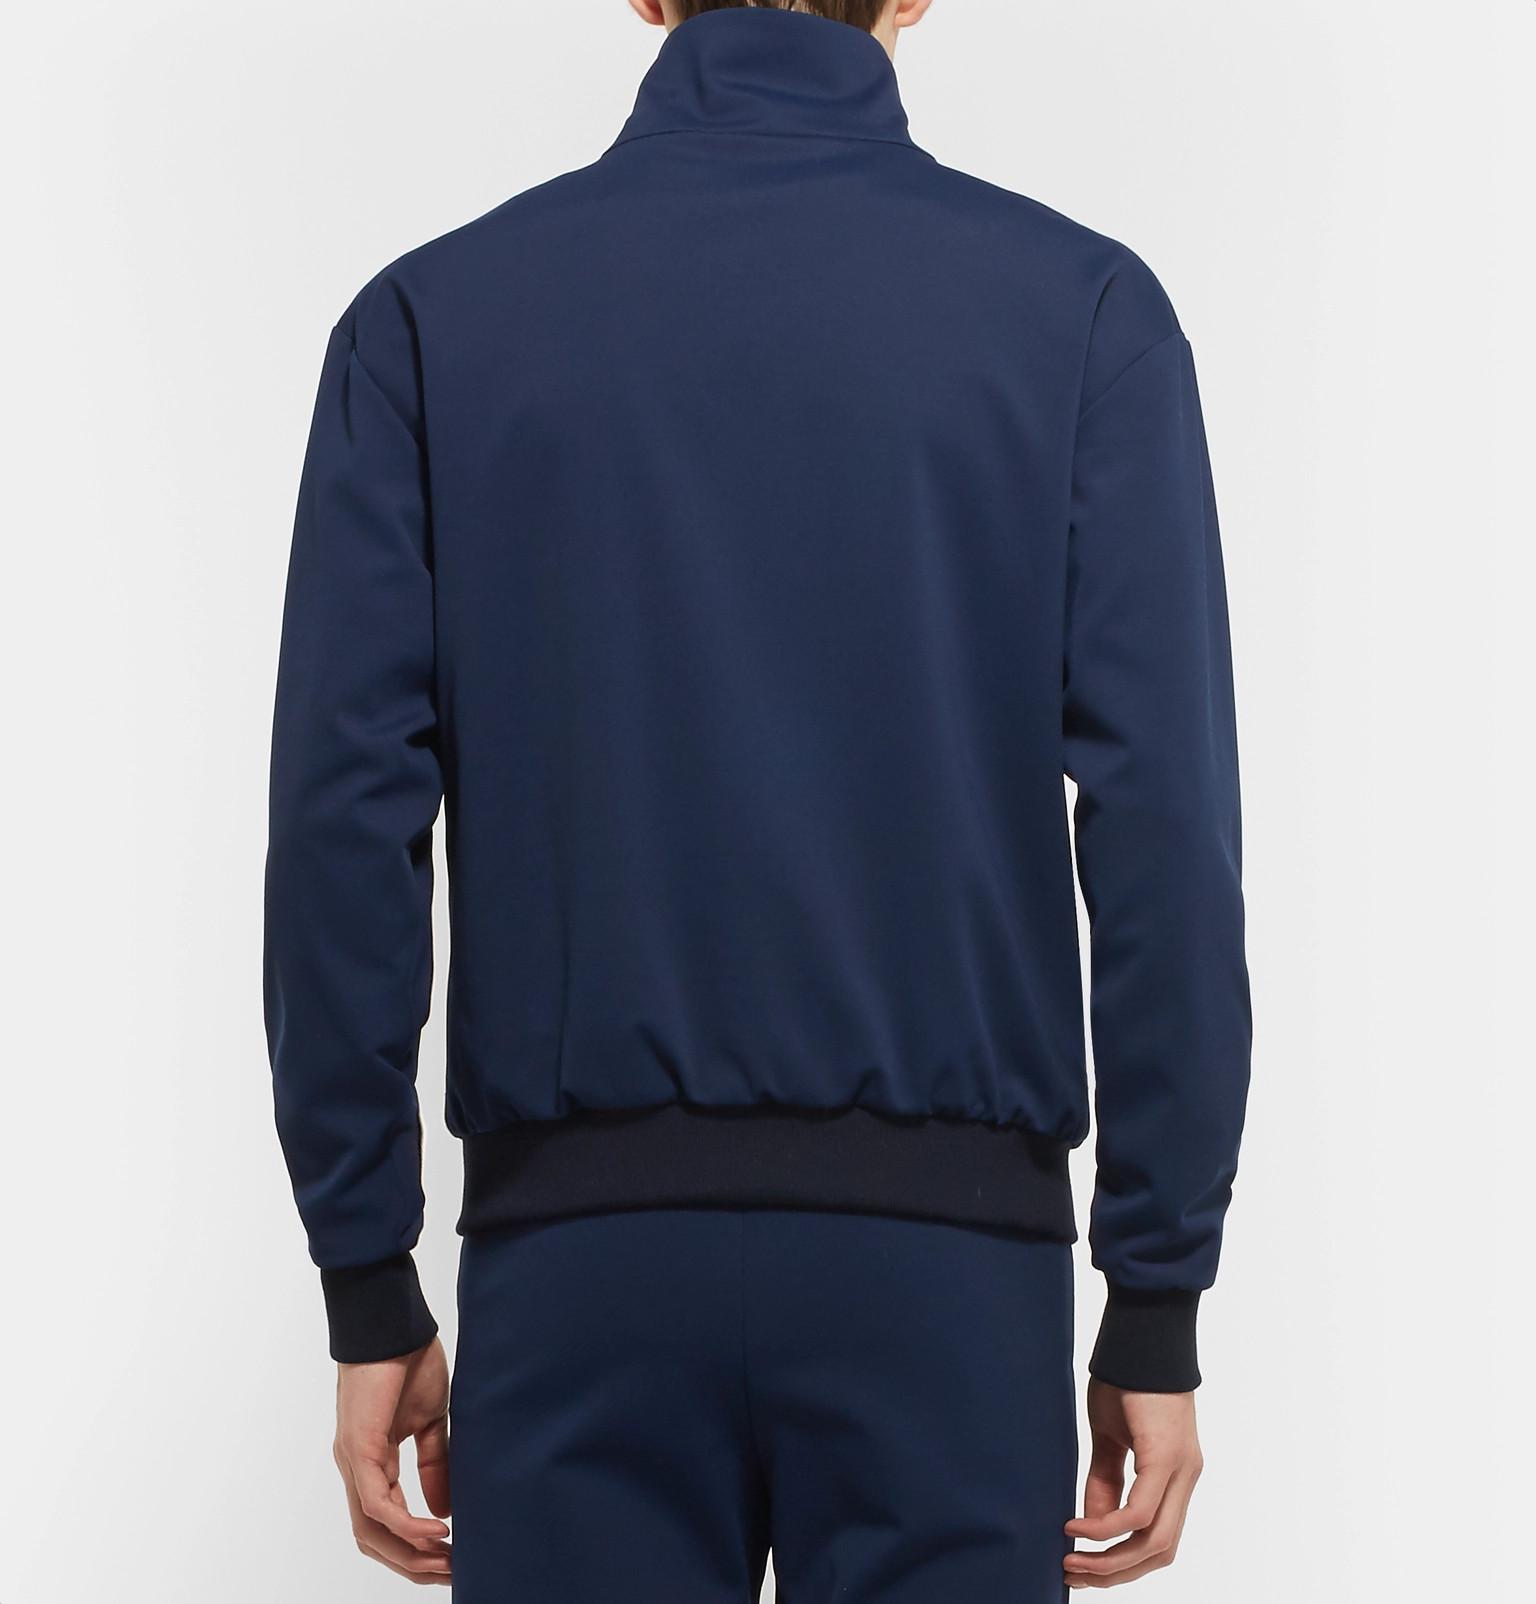 Balenciaga Synthetic Jersey Track Jacket in Navy (Blue) for Men - Lyst